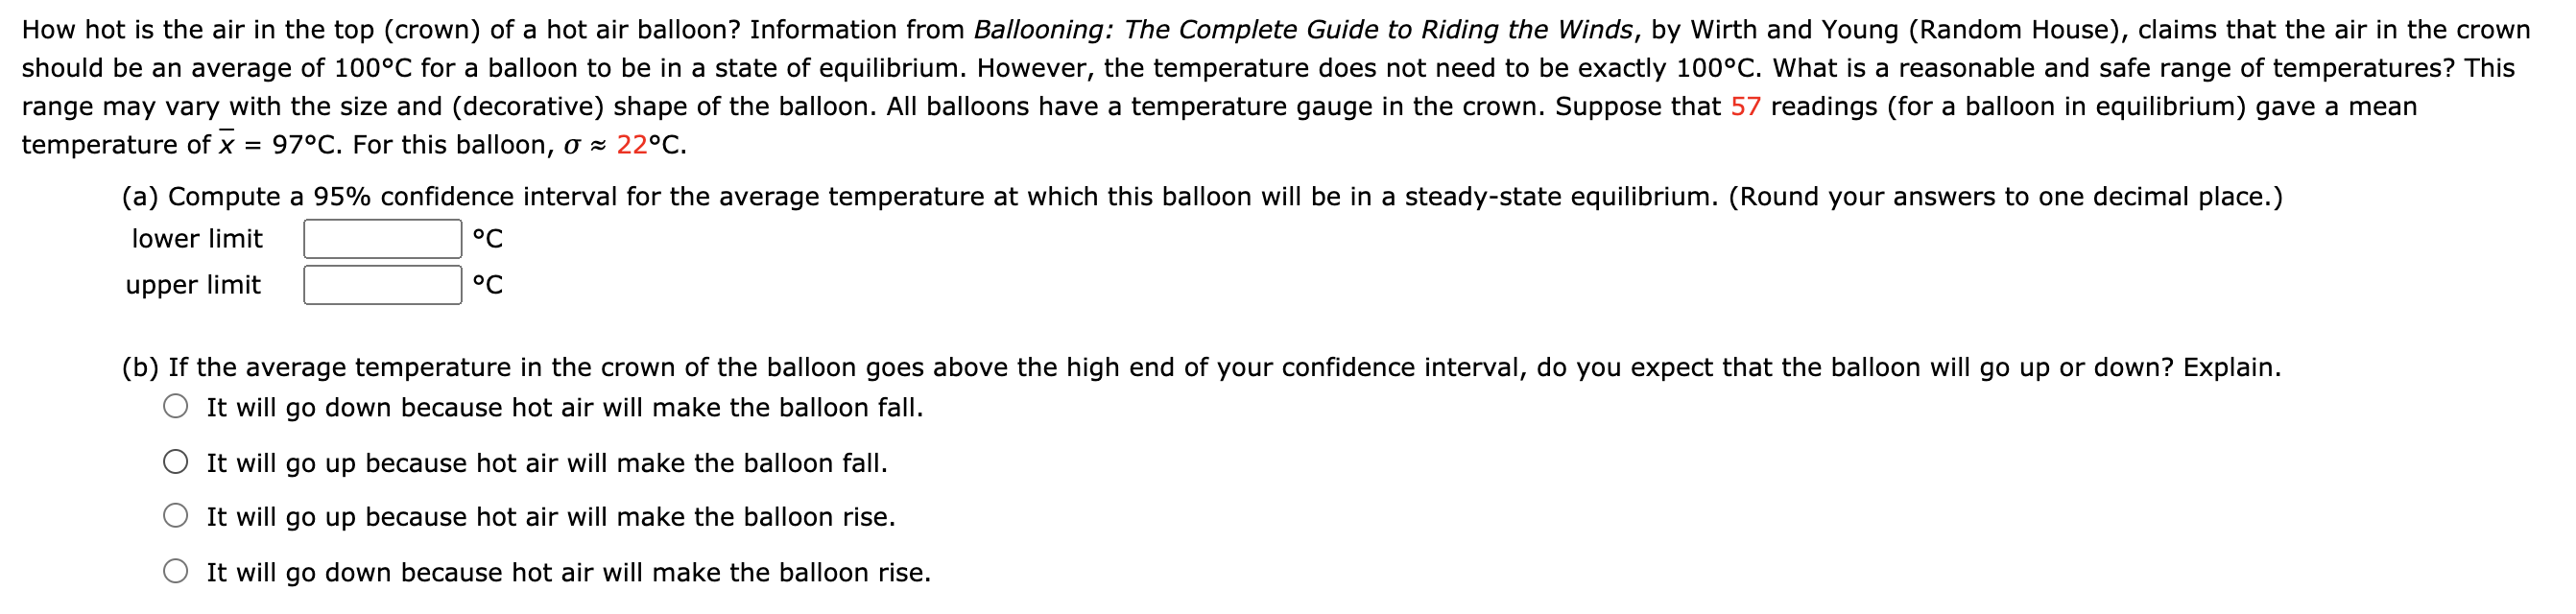 How hot is the air in the top (crown) of a hot air balloon? Information from Ballooning: The Complete Guide to Riding the Winds, by Wirth and Young (Random House), claims that the air in the crown
should be an average of 100°C for a balloon to be in a state of equilibrium. However, the temperature does not need to be exactly 100°C. What is a reasonable and safe range of temperatures? This
range may vary with the size and (decorative) shape of the balloon. All balloons have a temperature gauge in the crown. Suppose that 57 readings (for a balloon in equilibrium) gave a mean
temperature of x
= 97°C. For this balloon, o × 22°C.
(a) Compute a 95% confidence interval for the average temperature at which this balloon will be in a steady-state equilibrium. (Round your answers to one decimal place.)
lower limit
°C
upper limit
°C
(b) If the average temperature in the crown of the balloon goes above the high end of your confidence interval, do you expect that the balloon will go up or down? Explain.
O It will go down because hot air will make the balloon fall.
O It will go up because hot air will make the balloon fall.
It will go up because hot air will make the balloon rise.
It will go down because hot air will make the balloon rise.
